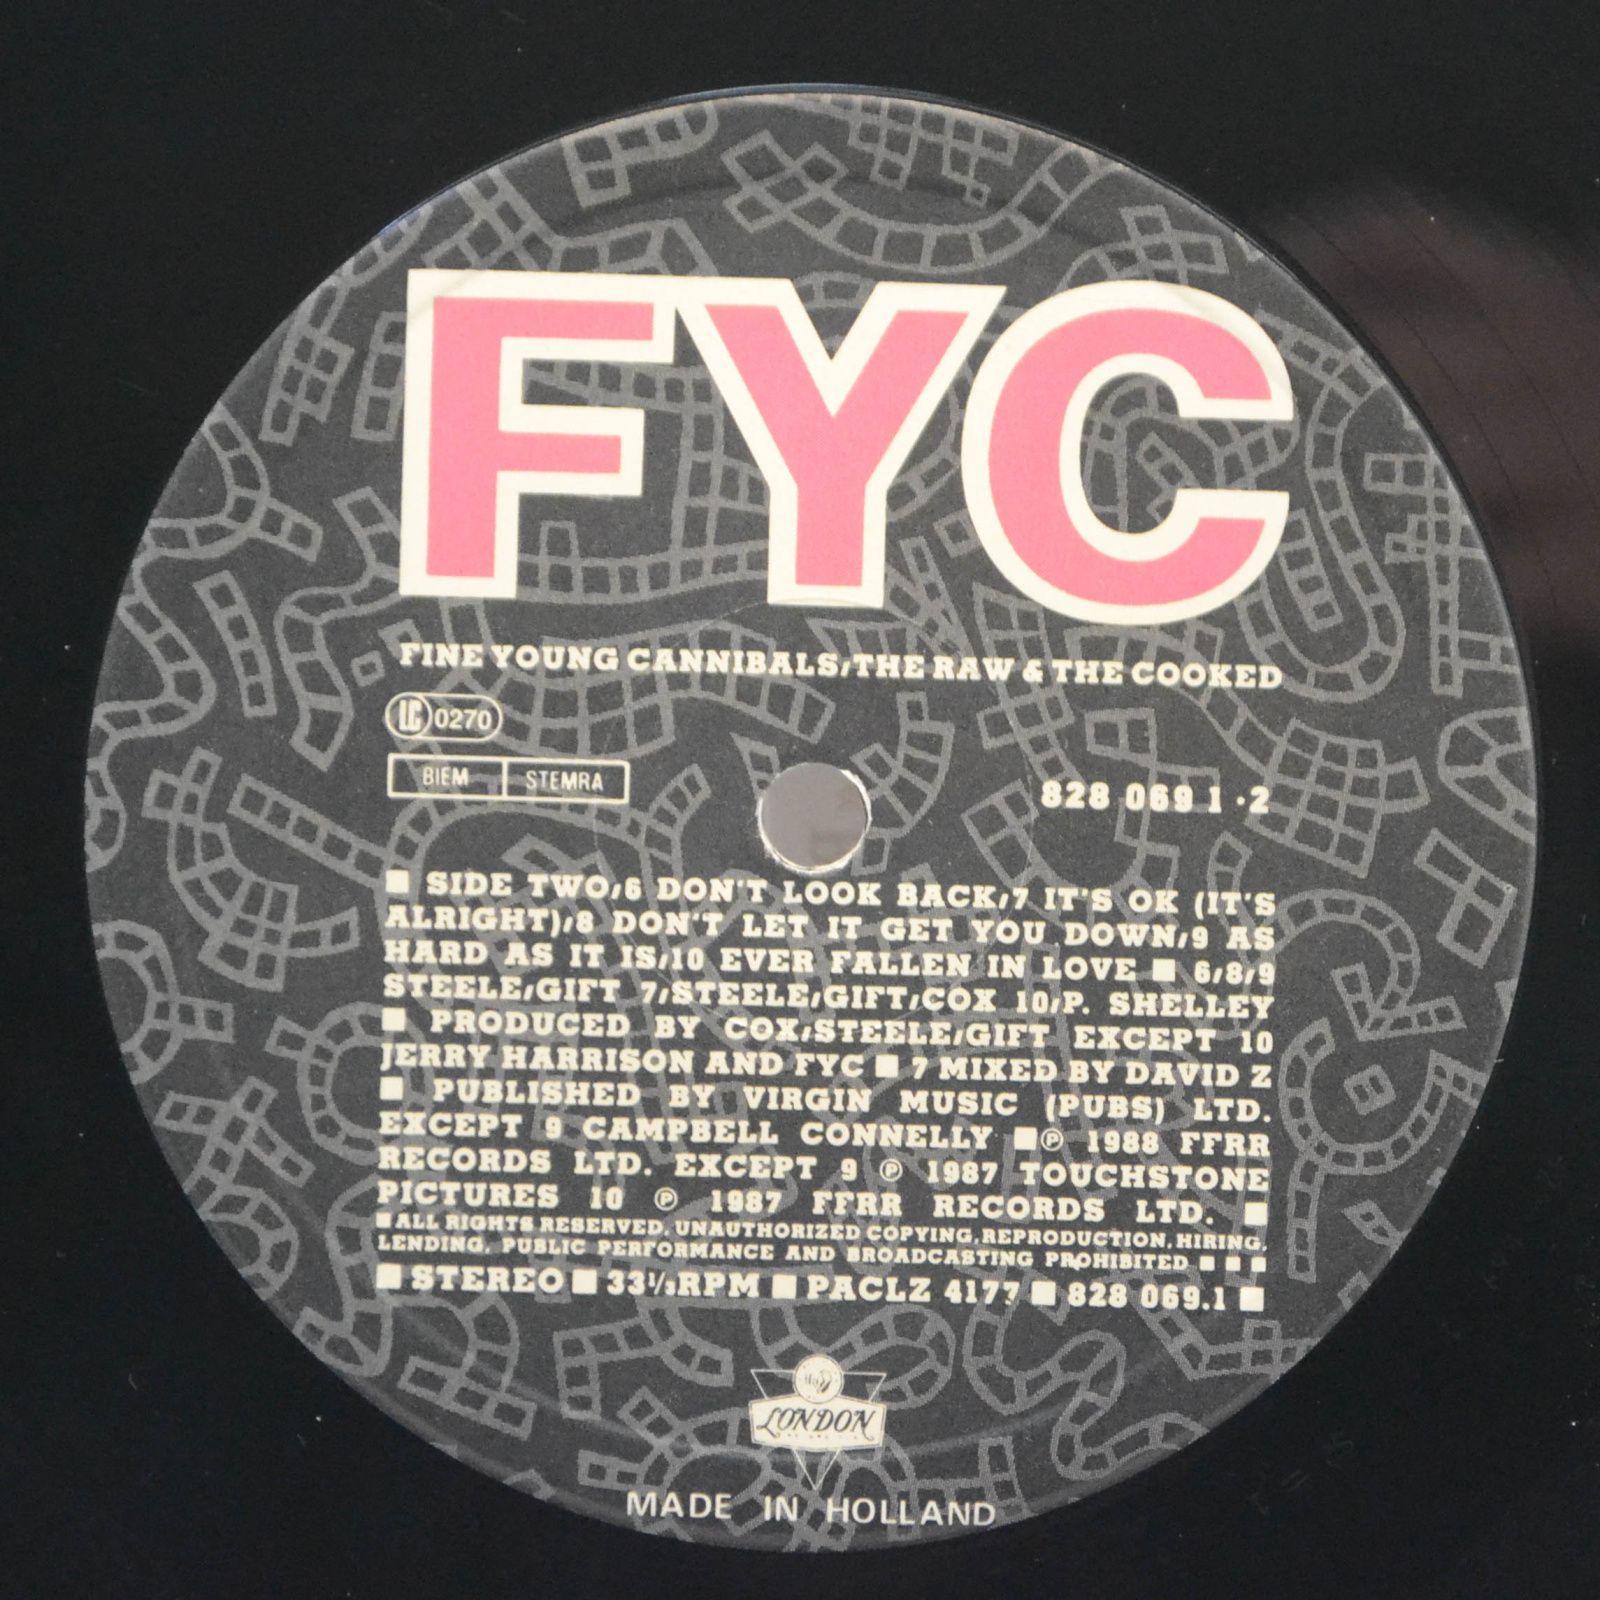 Fine Young Cannibals — The Raw & The Cooked, 1988